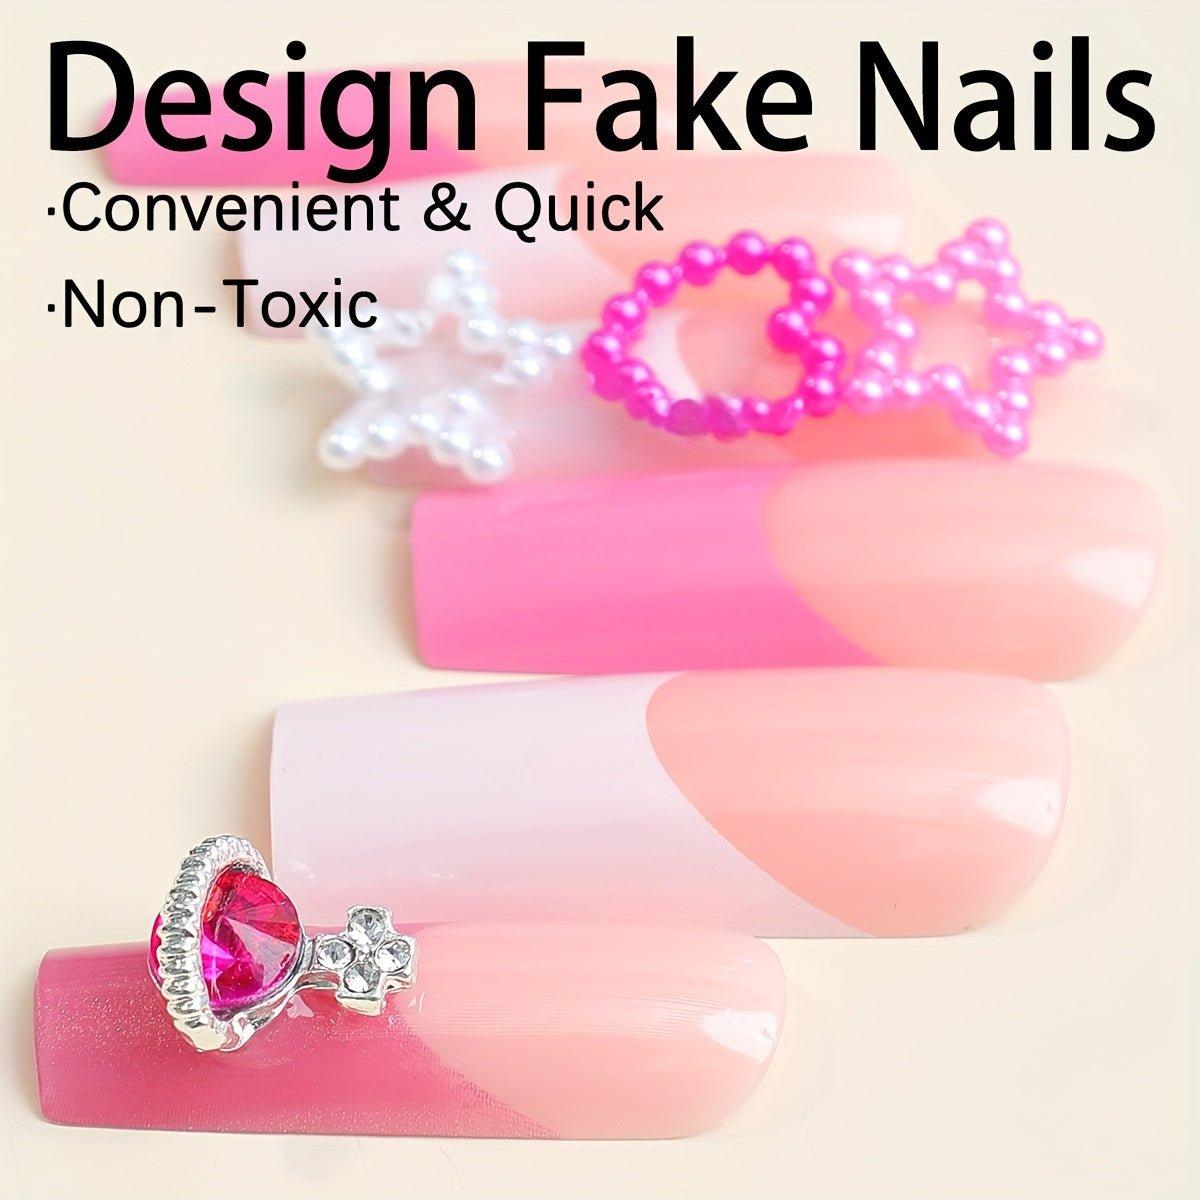 24pcs Long Square French Wearable Nails with 3D Candy, Pinkish Bear, and Star Shapes Pearl Decorations. Includes 1pc Nail File and 1sheet Adhesive Tabs" - J & B's Accessories